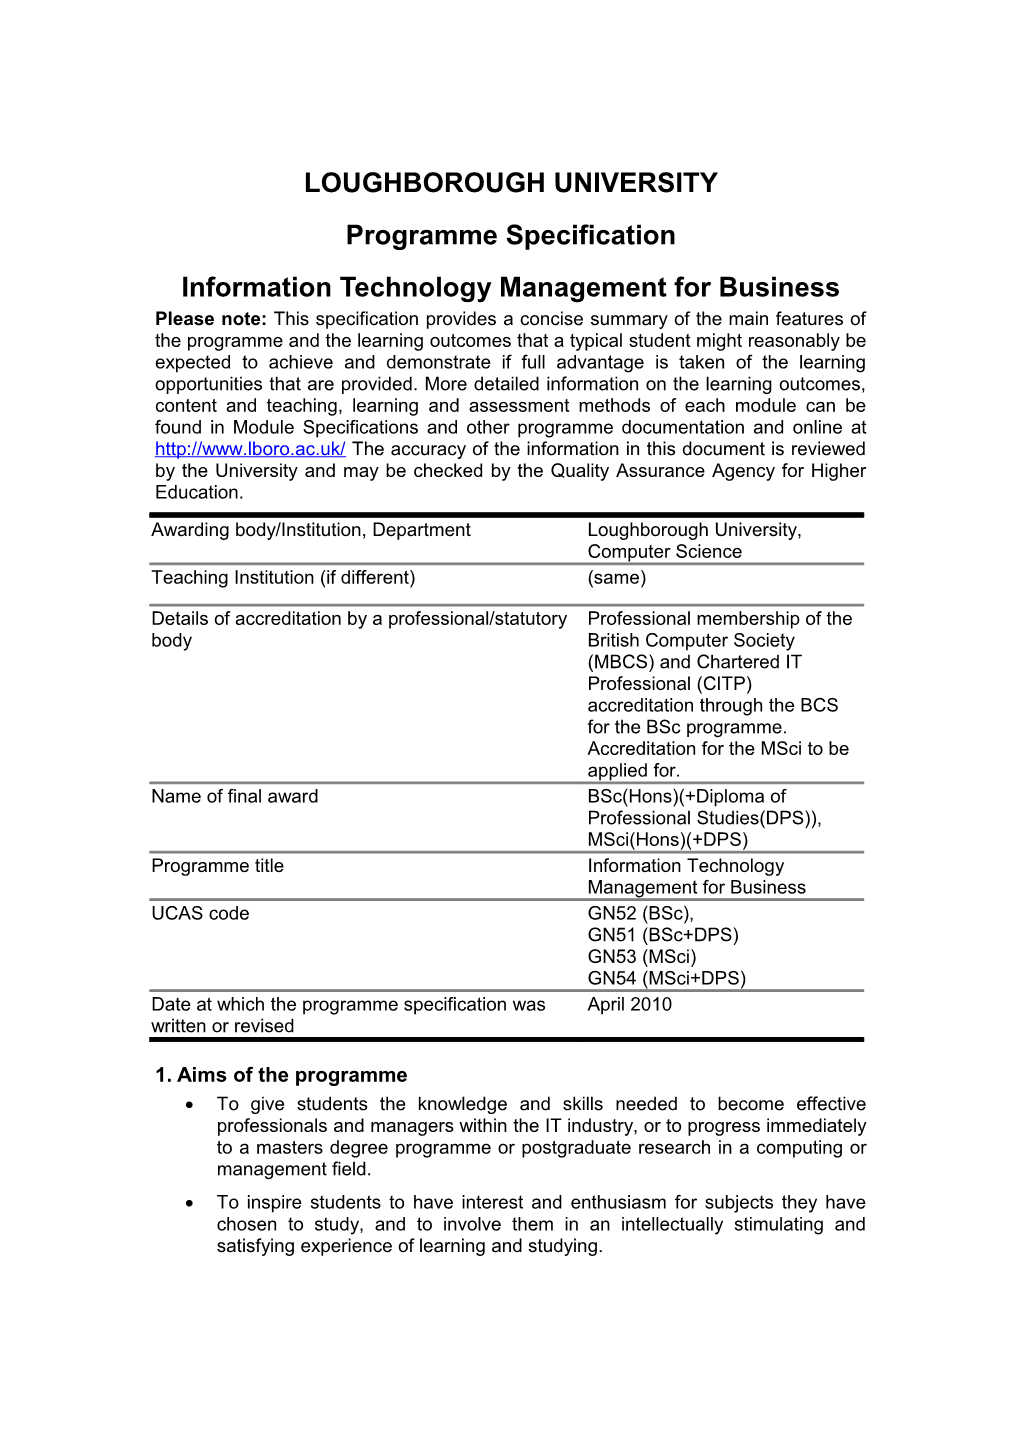 Infomation Technology Management for Buiness - Programme Specification